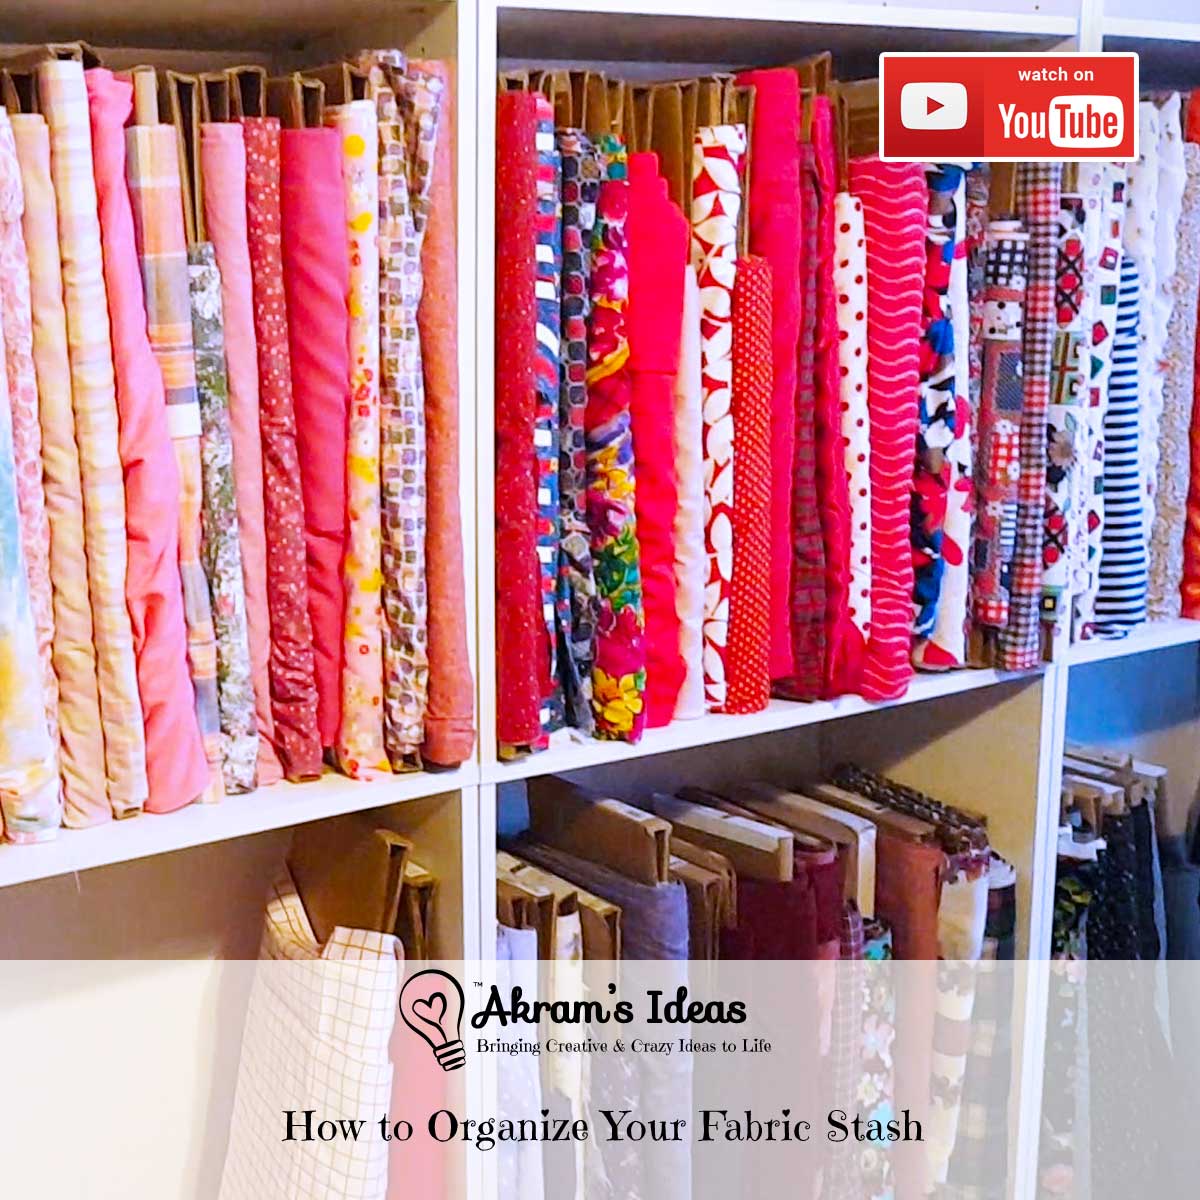 Learn how to organize your fabric stash using a few bookcases and free cardboard.